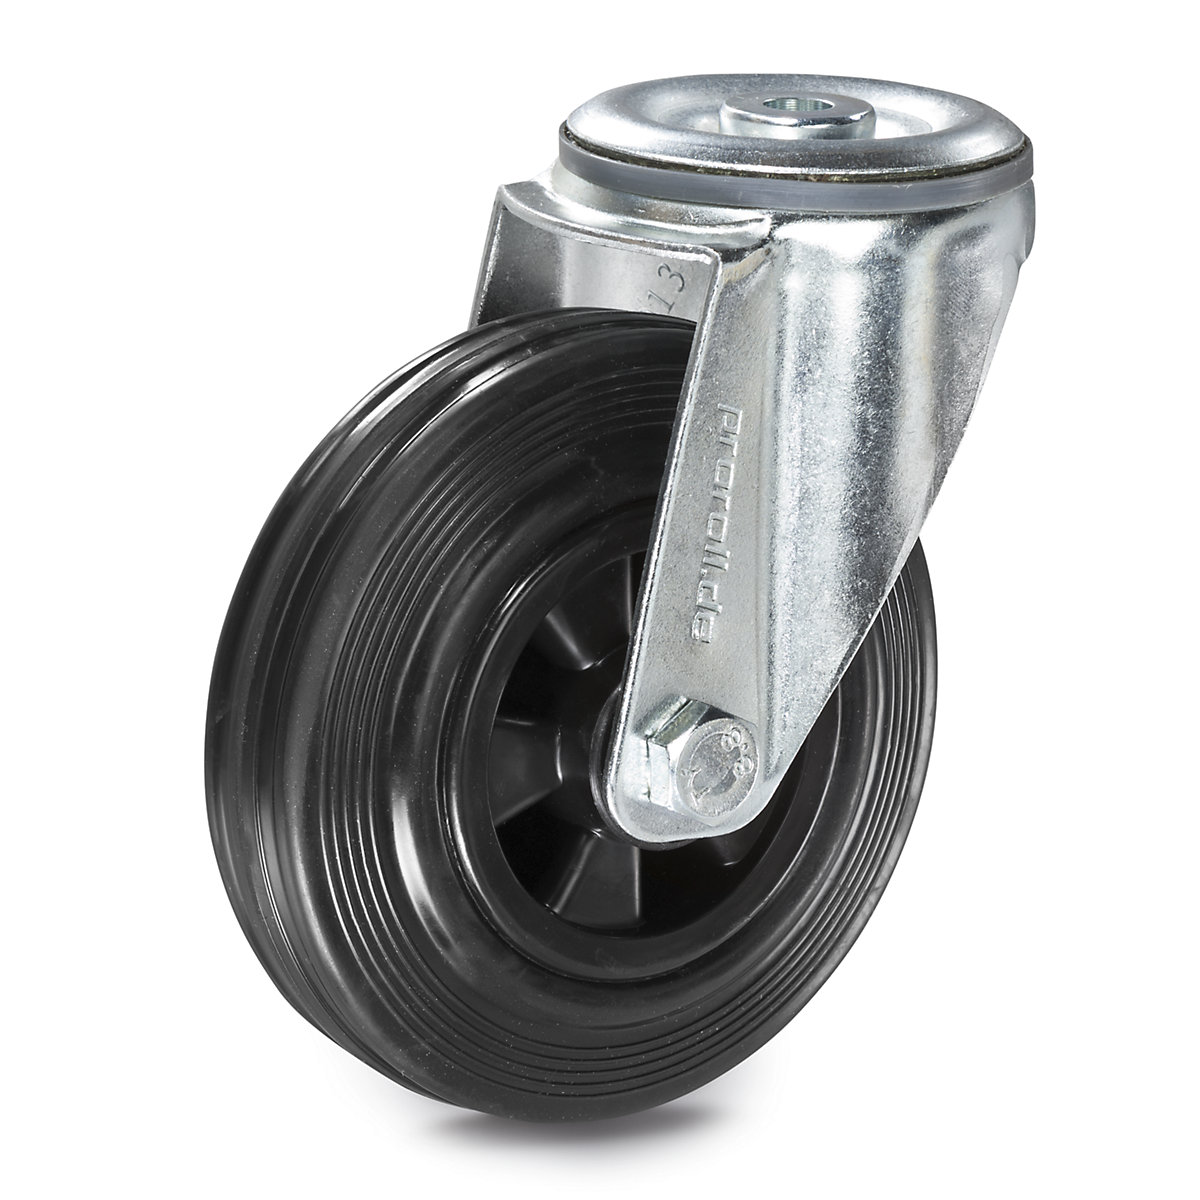 Solid rubber tyre on plastic rim - Proroll